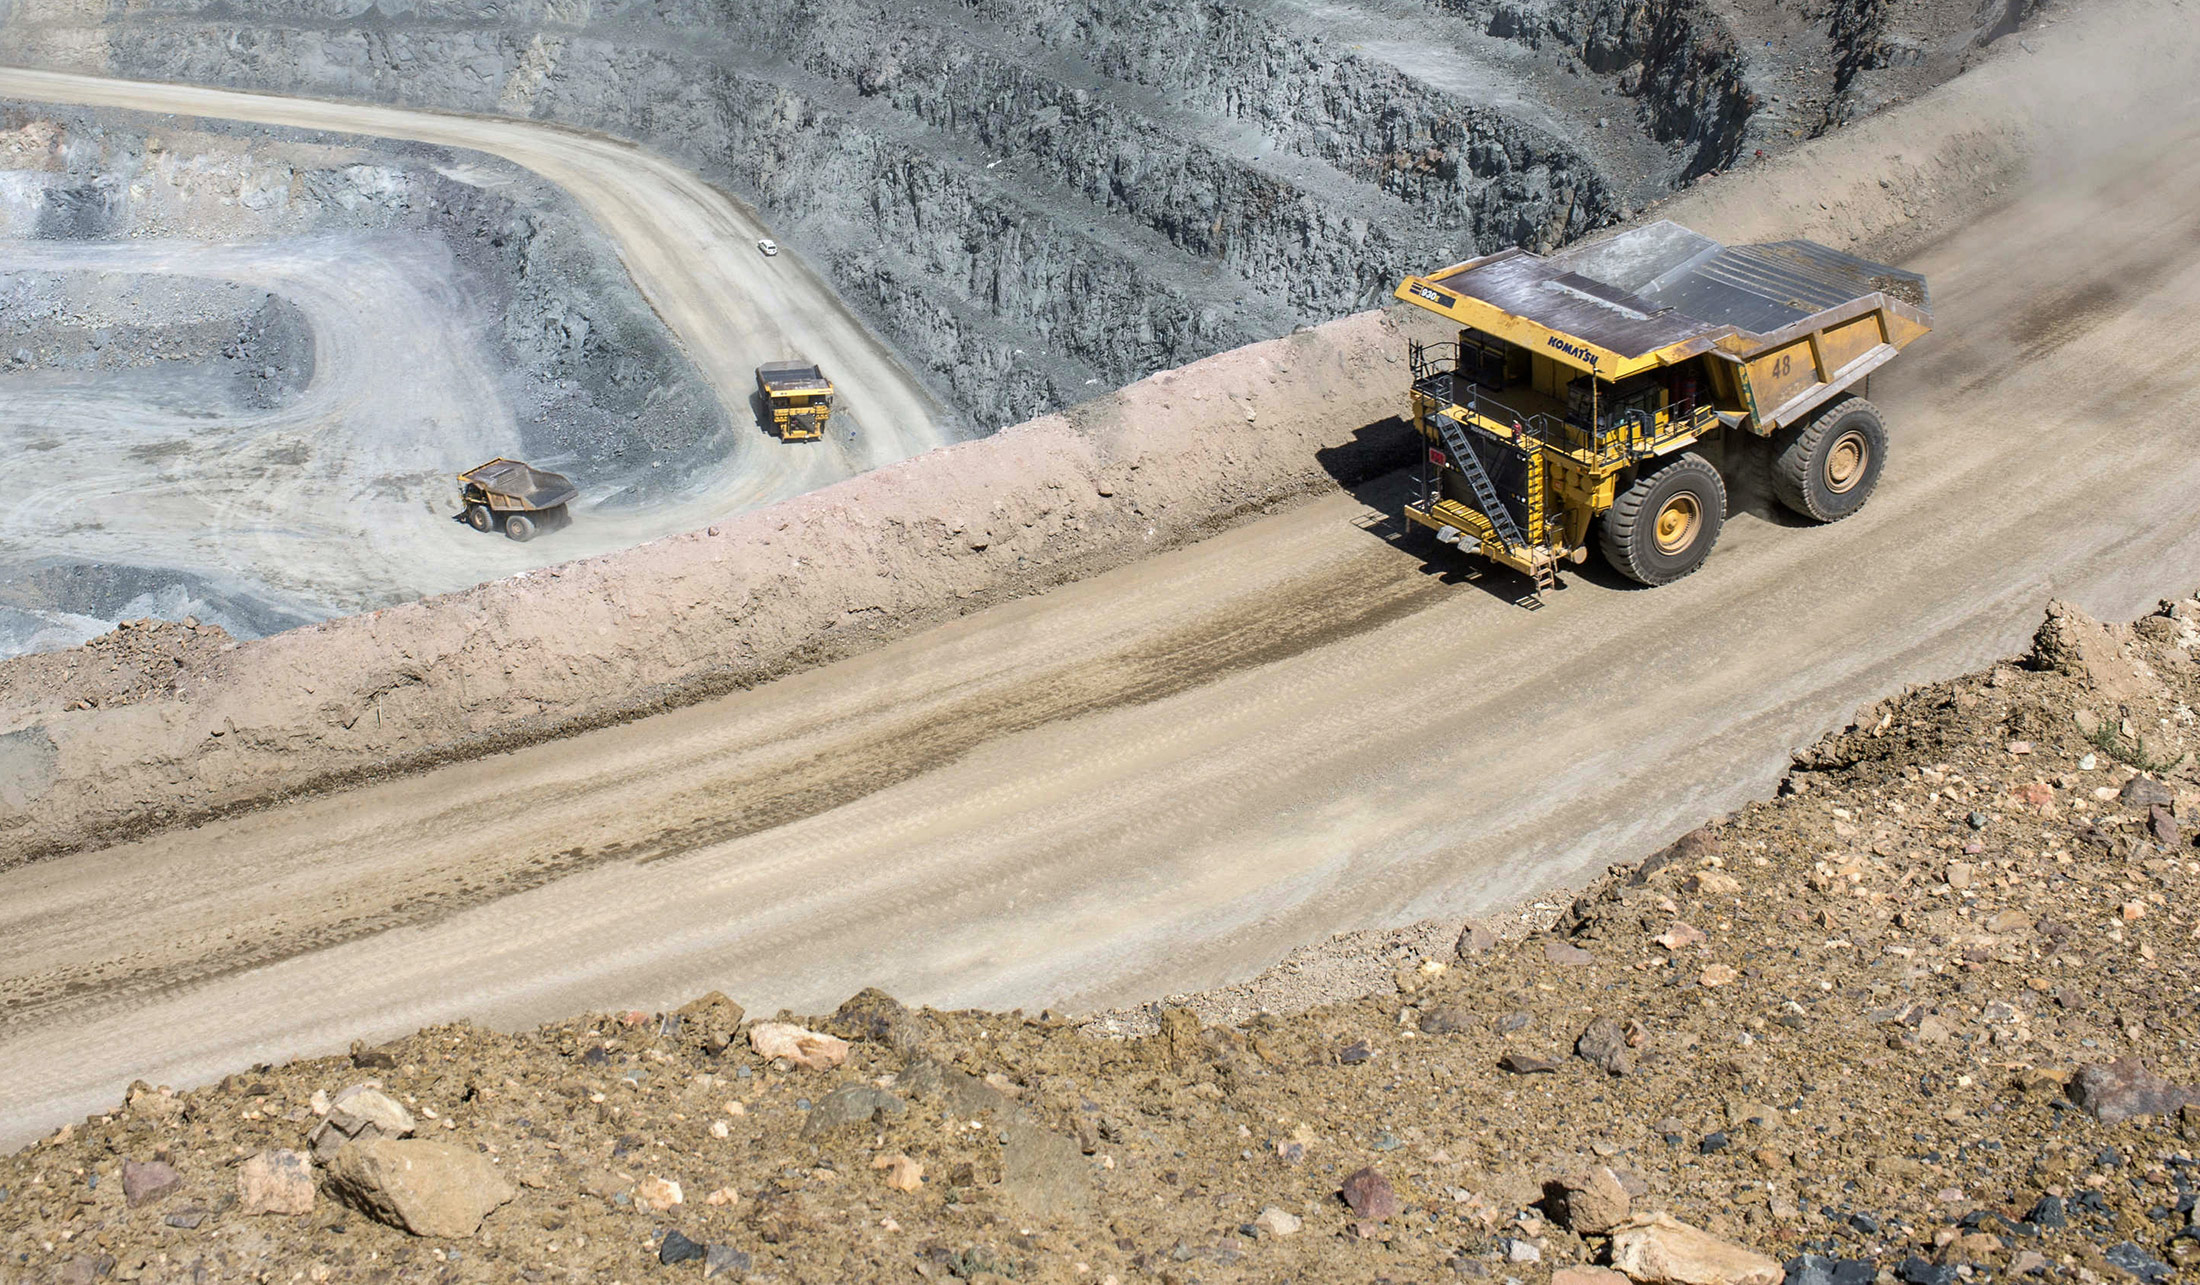 Dump trucks operate in an open pit at the Oyu Tolgoi copper-gold mine, jointly owned by Rio Tinto Group's Turquoise Hill Resources Ltd. unit and state-owned Erdenes Oyu Tolgoi LLC, in Khanbogd, the South Gobi desert, Mongolia, on Saturday, July 23, 2016. Mongolia exported 817,000 tons of copper concentrate in the first half of the year compared with 663,800 tons a year earlier, an increase of 23.1 percent.
